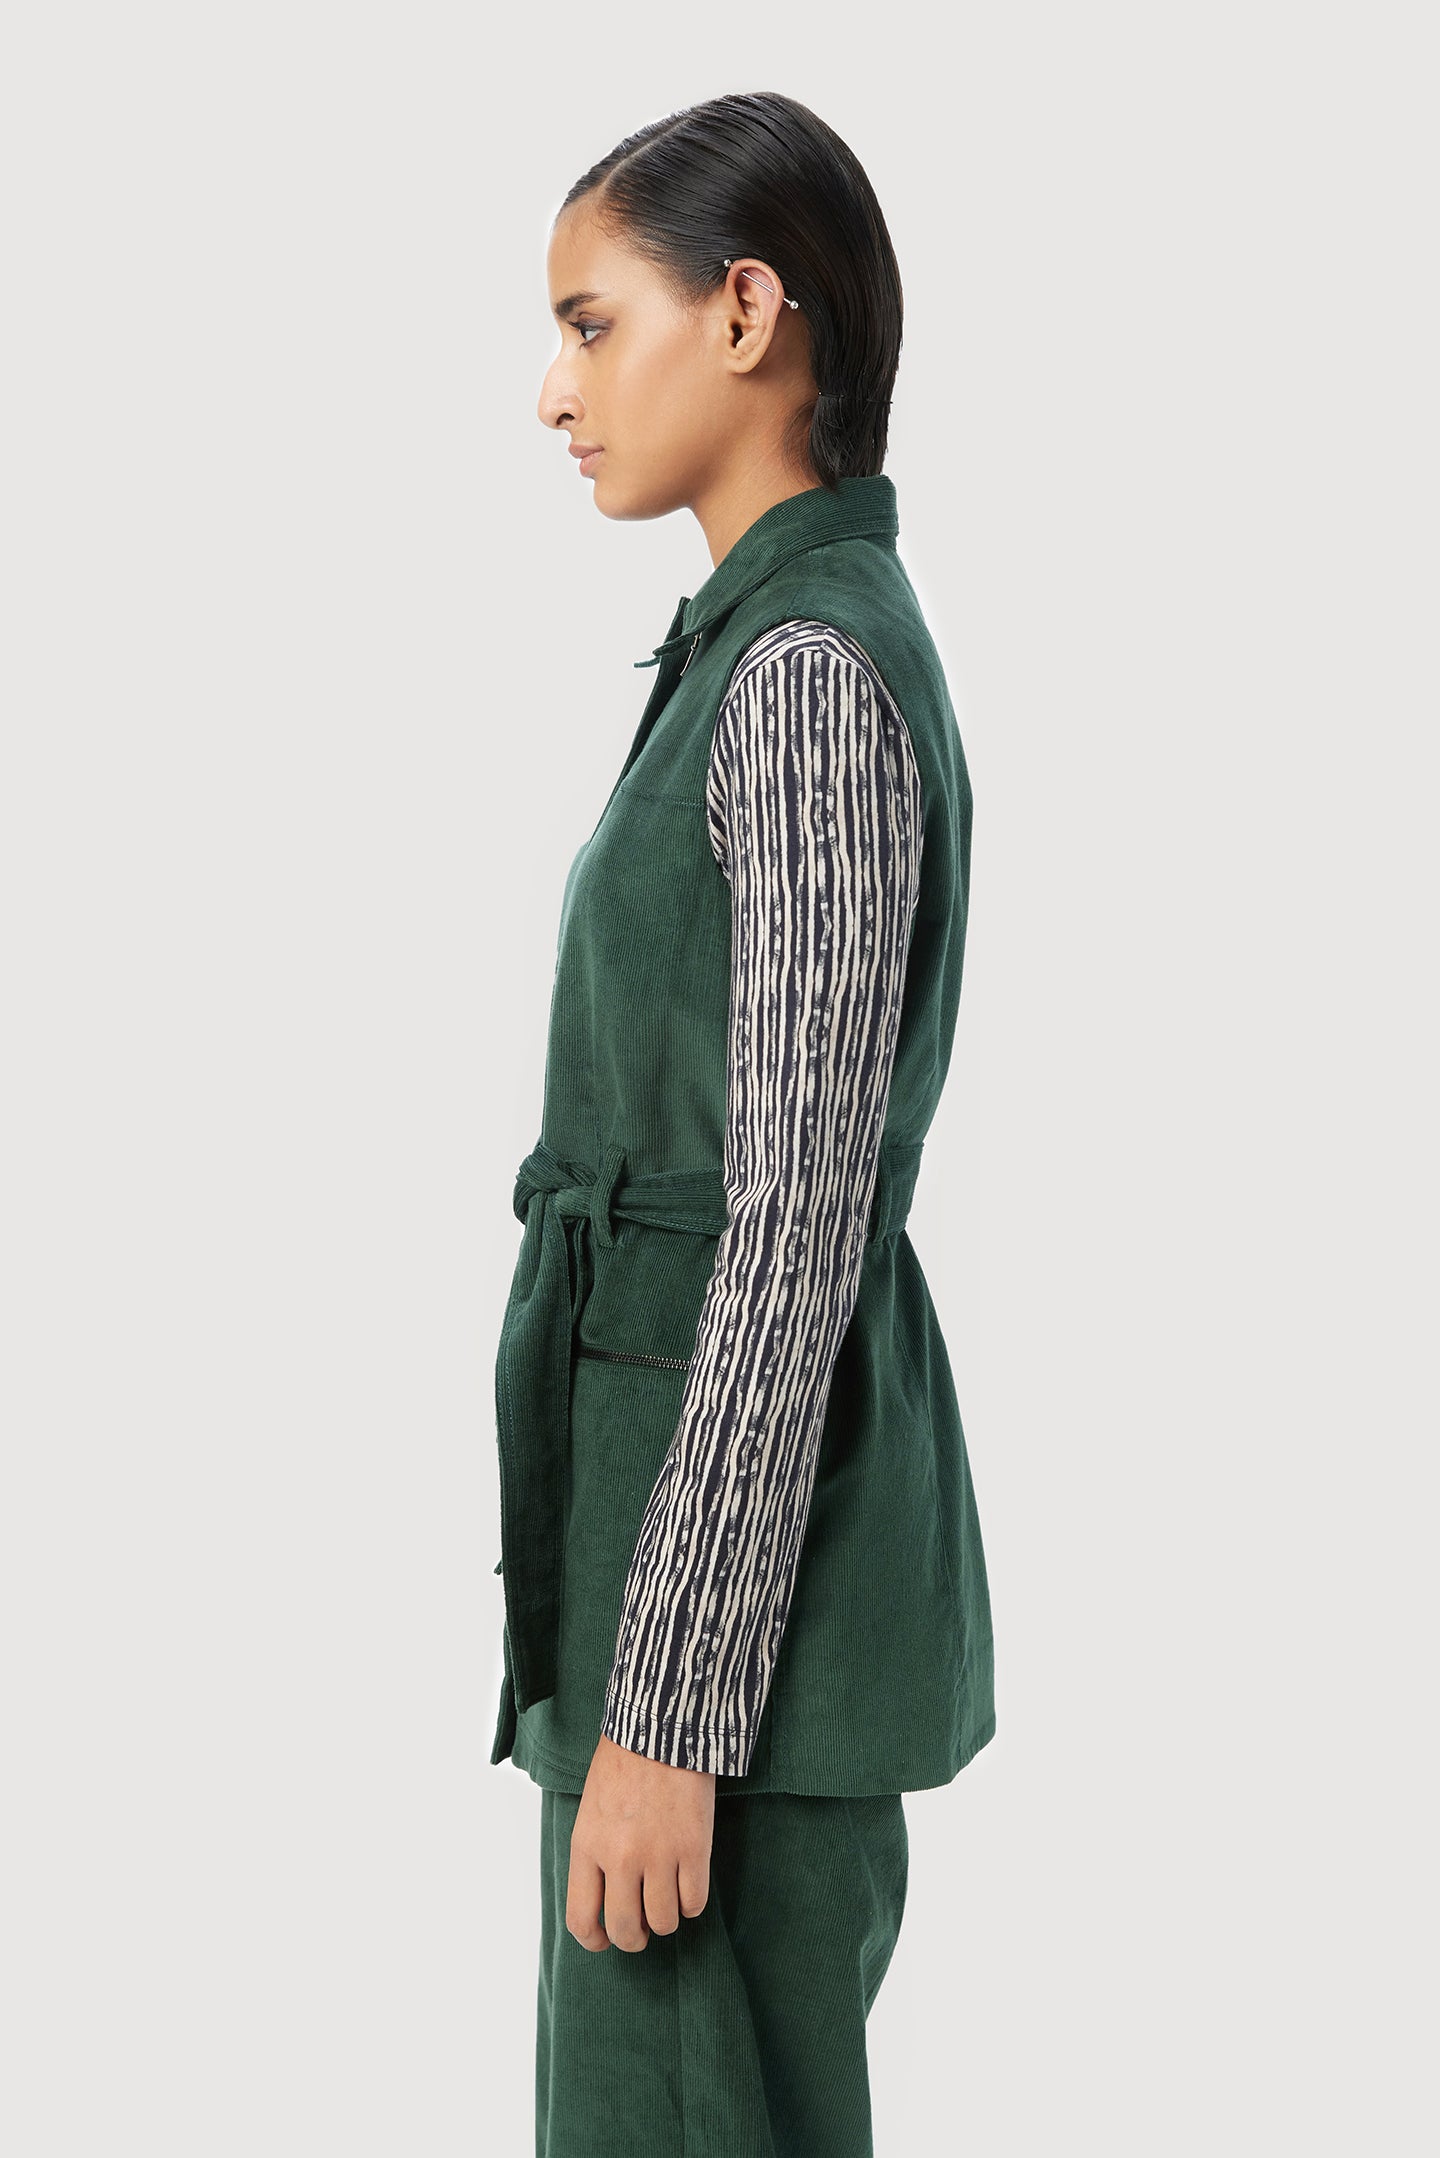 Easy Fit Sleeveless Jacket with Double Stitch Construction